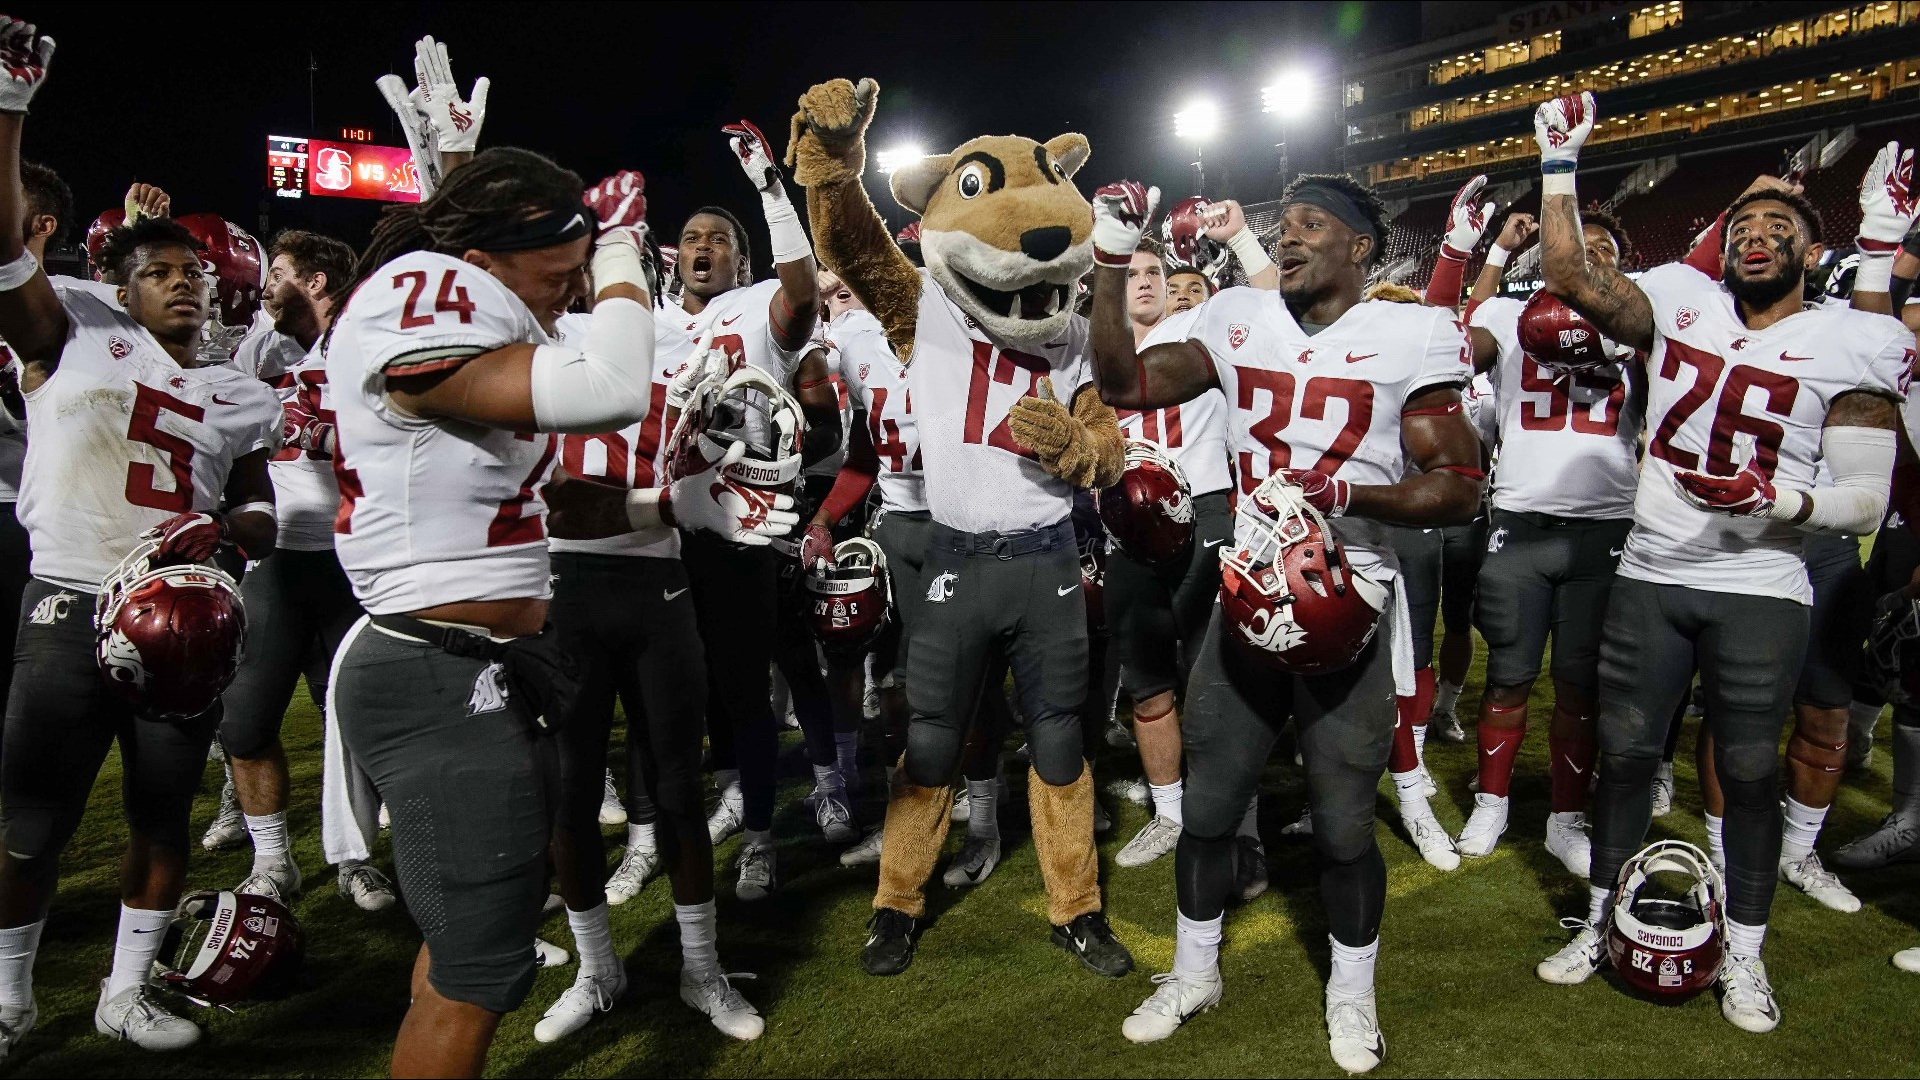 WSU plays the Pac-12's top three teams on the road this season. Where will they stack up?